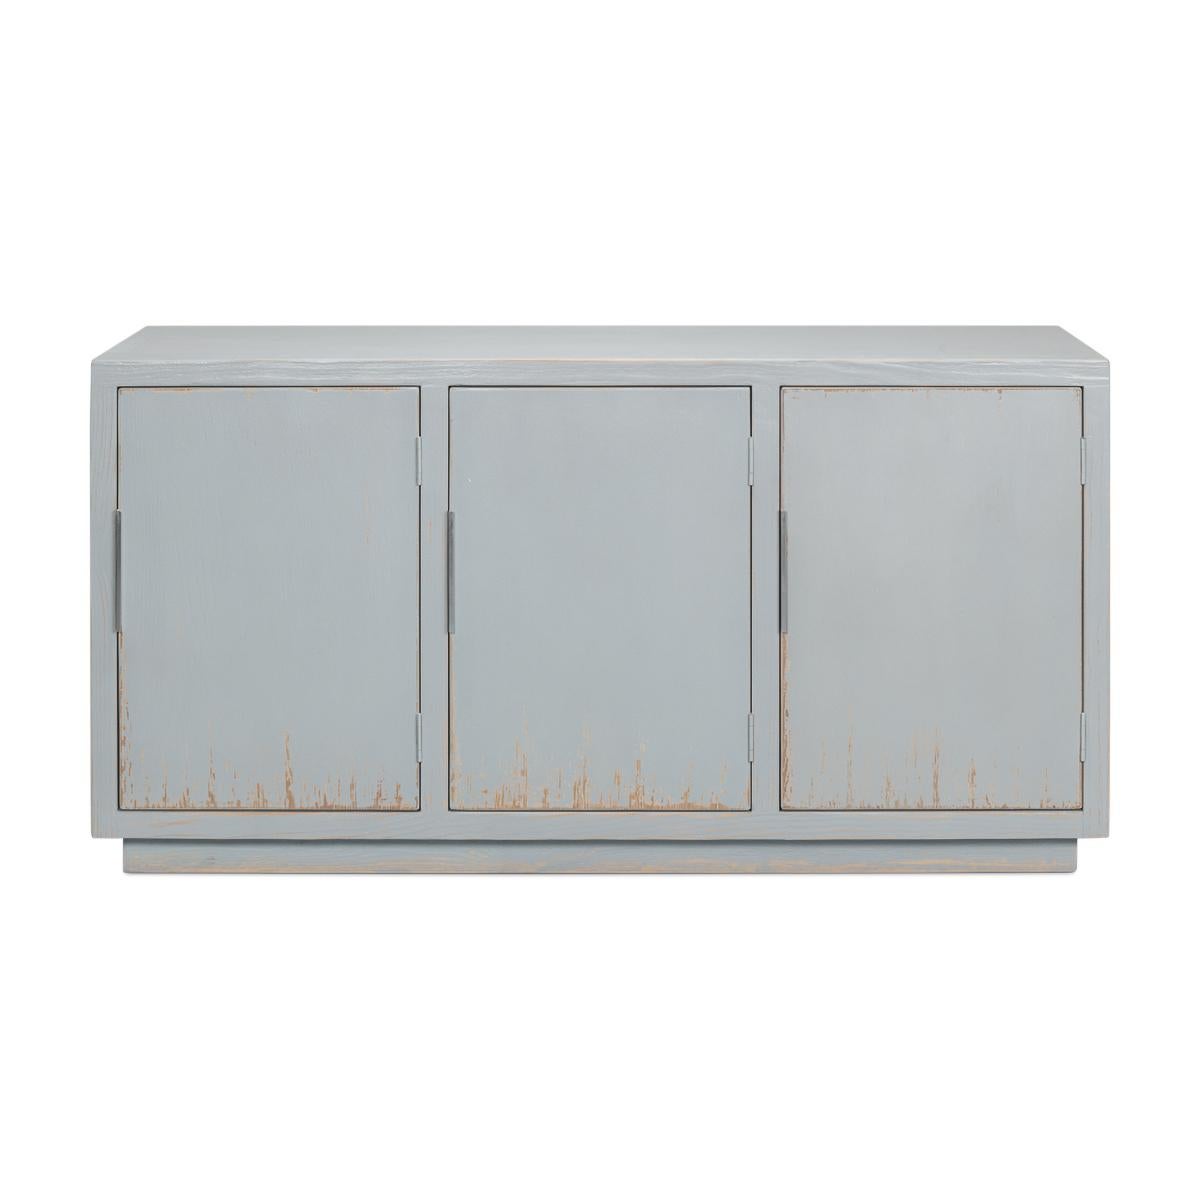 Modern Rustic painted sideboard in a light blue painted finish. This sideboard has been distressed and antiqued for a rustic feel. The doors fitted with contemporary hardware specifically selected to reflect the beautiful patina of the finish. The